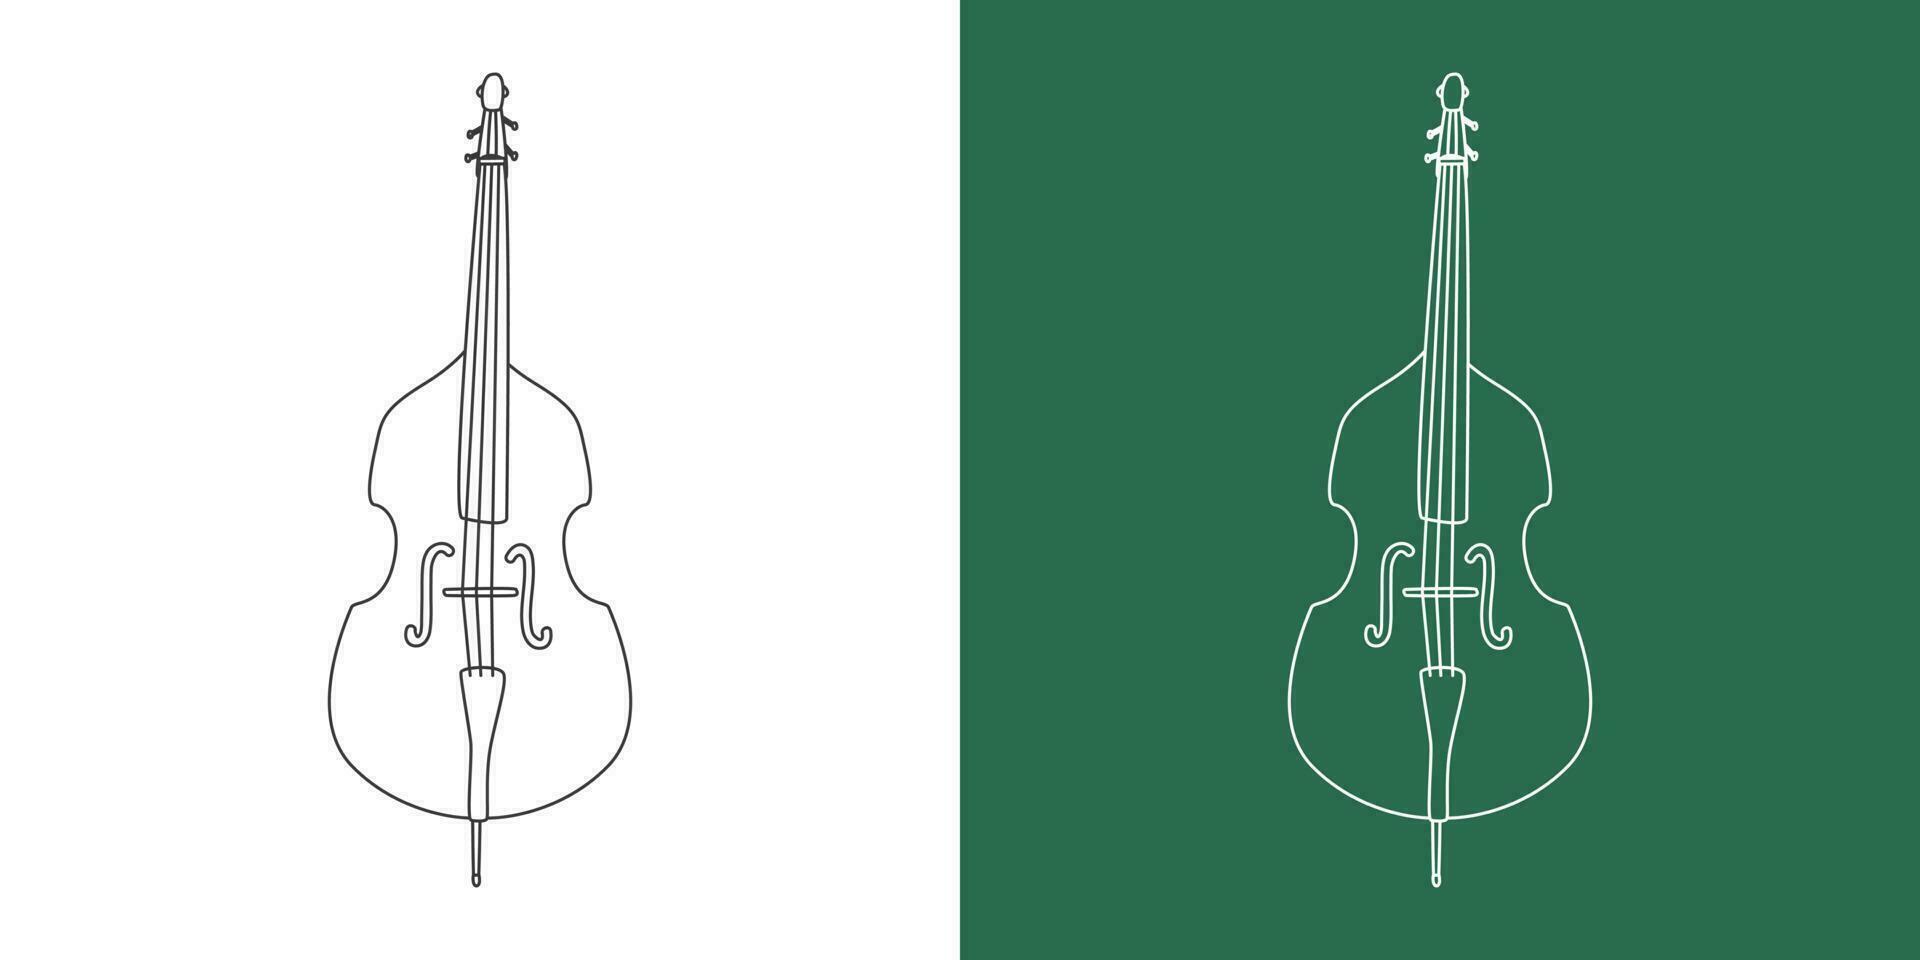 Double bass line drawing cartoon style. String instrument double bass clipart drawing in linear style isolated on white and chalkboard background. Musical instrument clipart concept, vector design